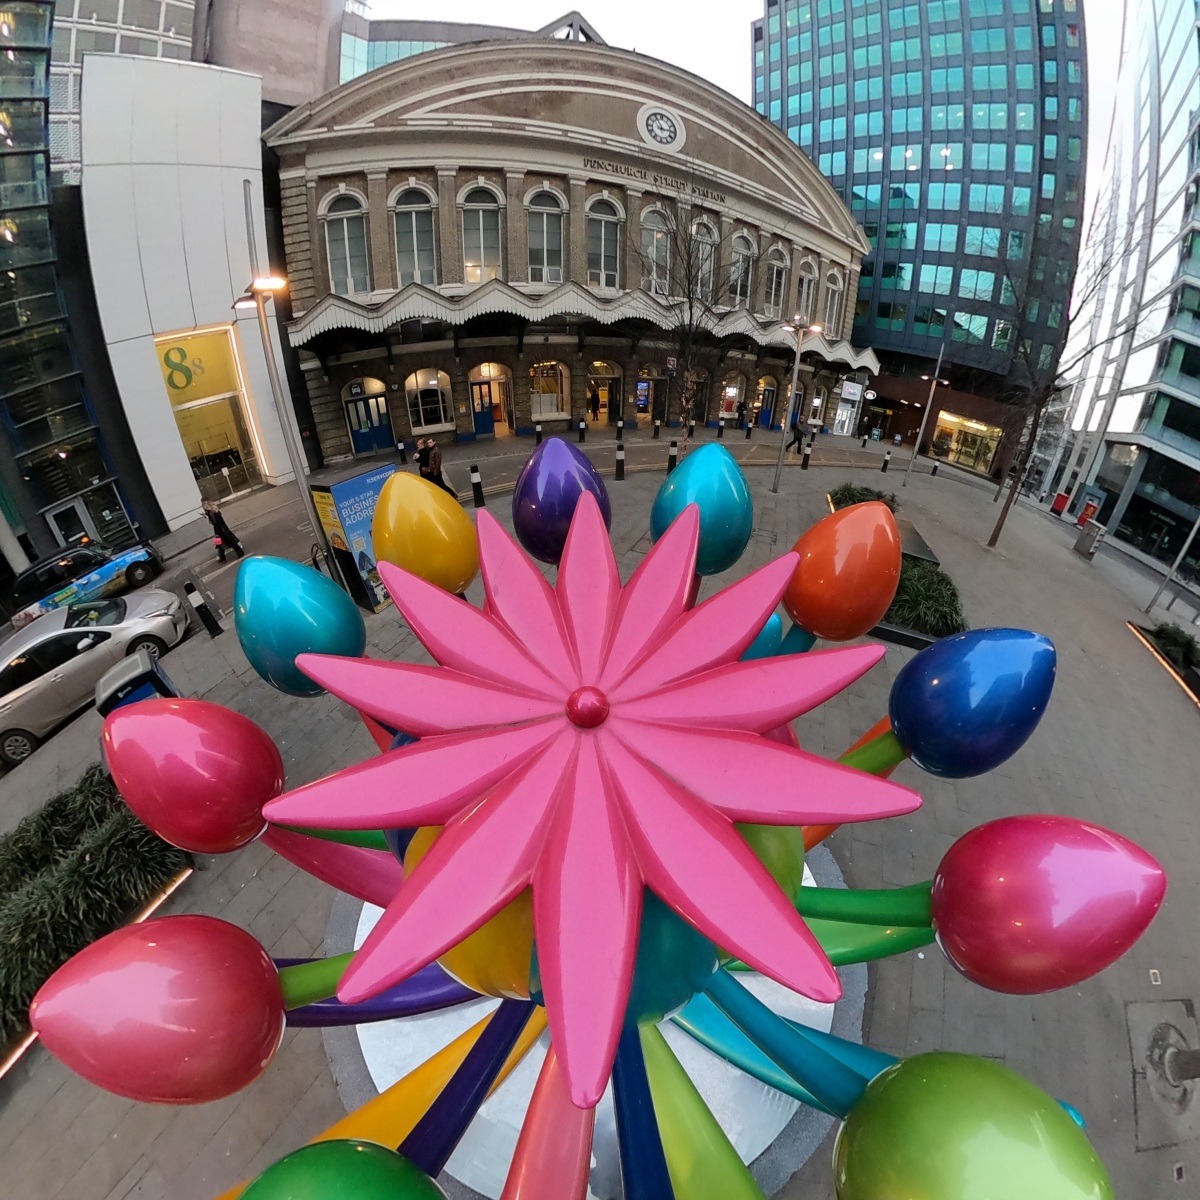 Bloom Paradise by Jun T. Lai. Sculpture in the City of London January 2023.